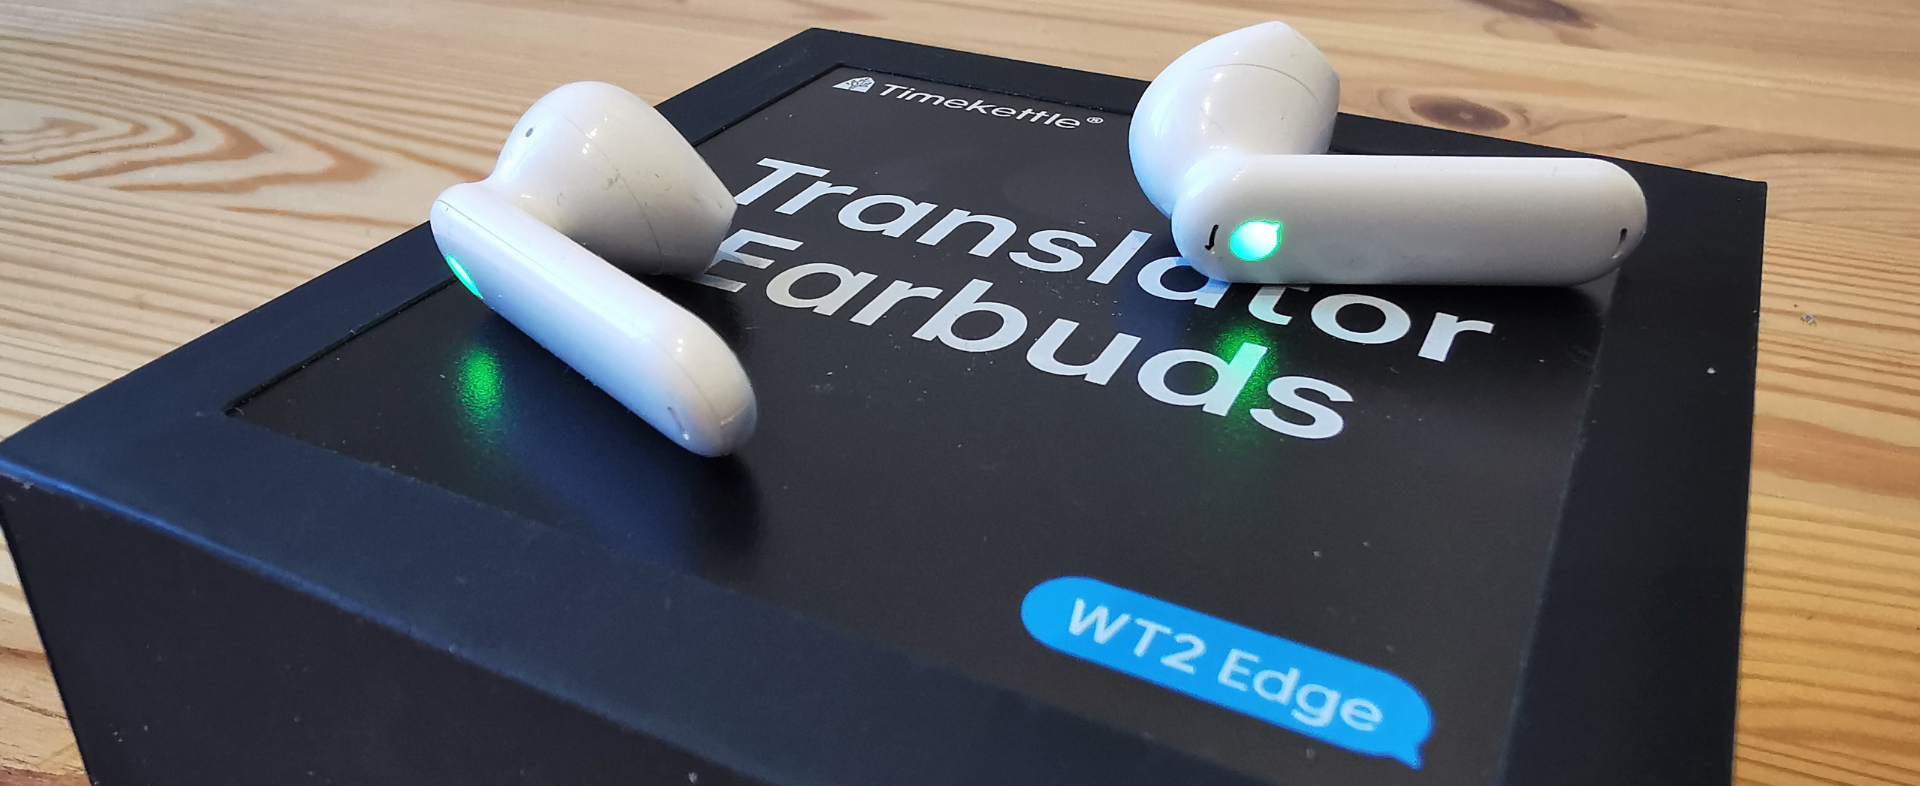  Timekettle WT2 Edge/W3 Translator Device White-Bidirection  Simultaneous Translation, Language Translator Device with 40 Languages & 93  Accent Online, Translator Earbuds with APP, Fit for iOS & Android : Office  Products